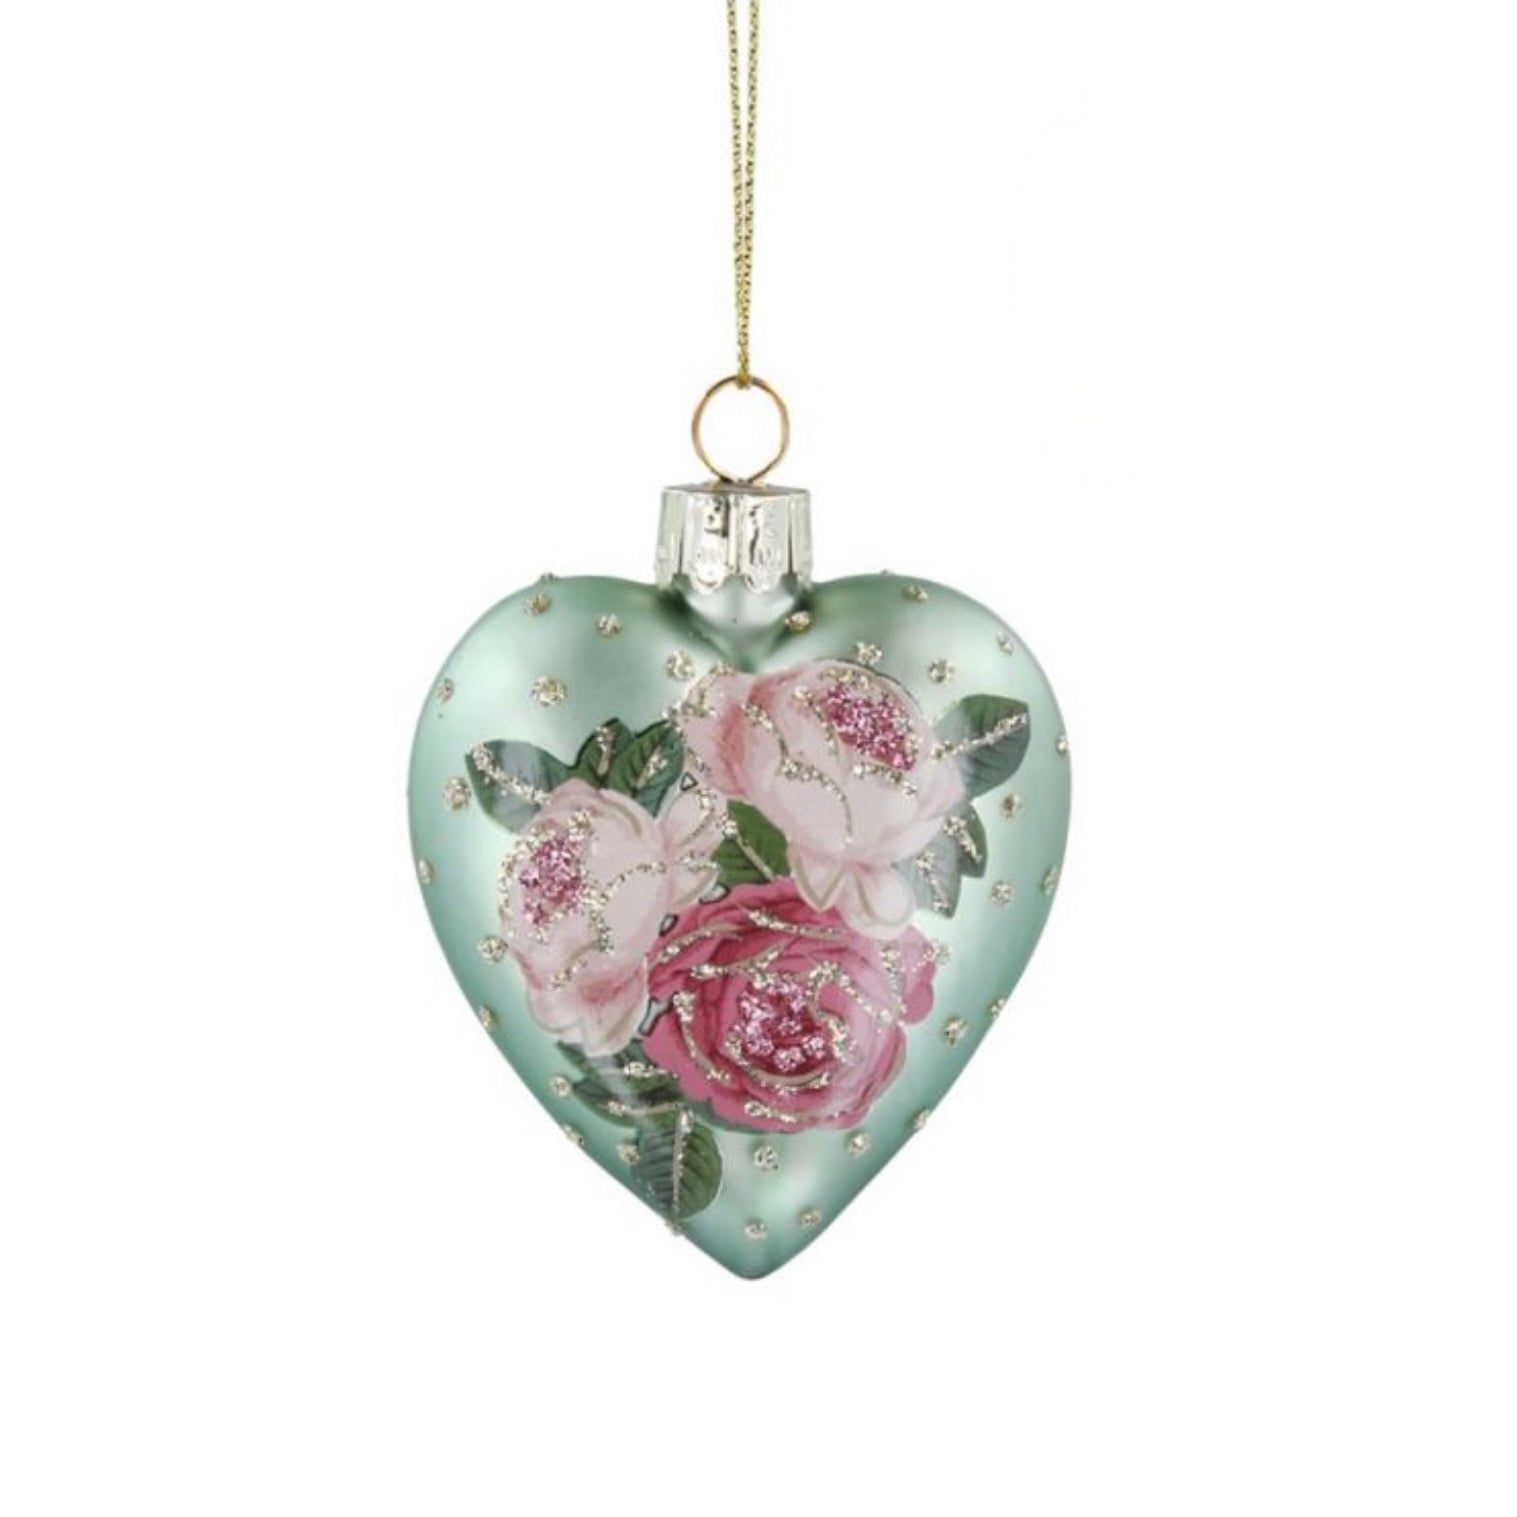 Heart with Pink Roses Glass Ornament - Green